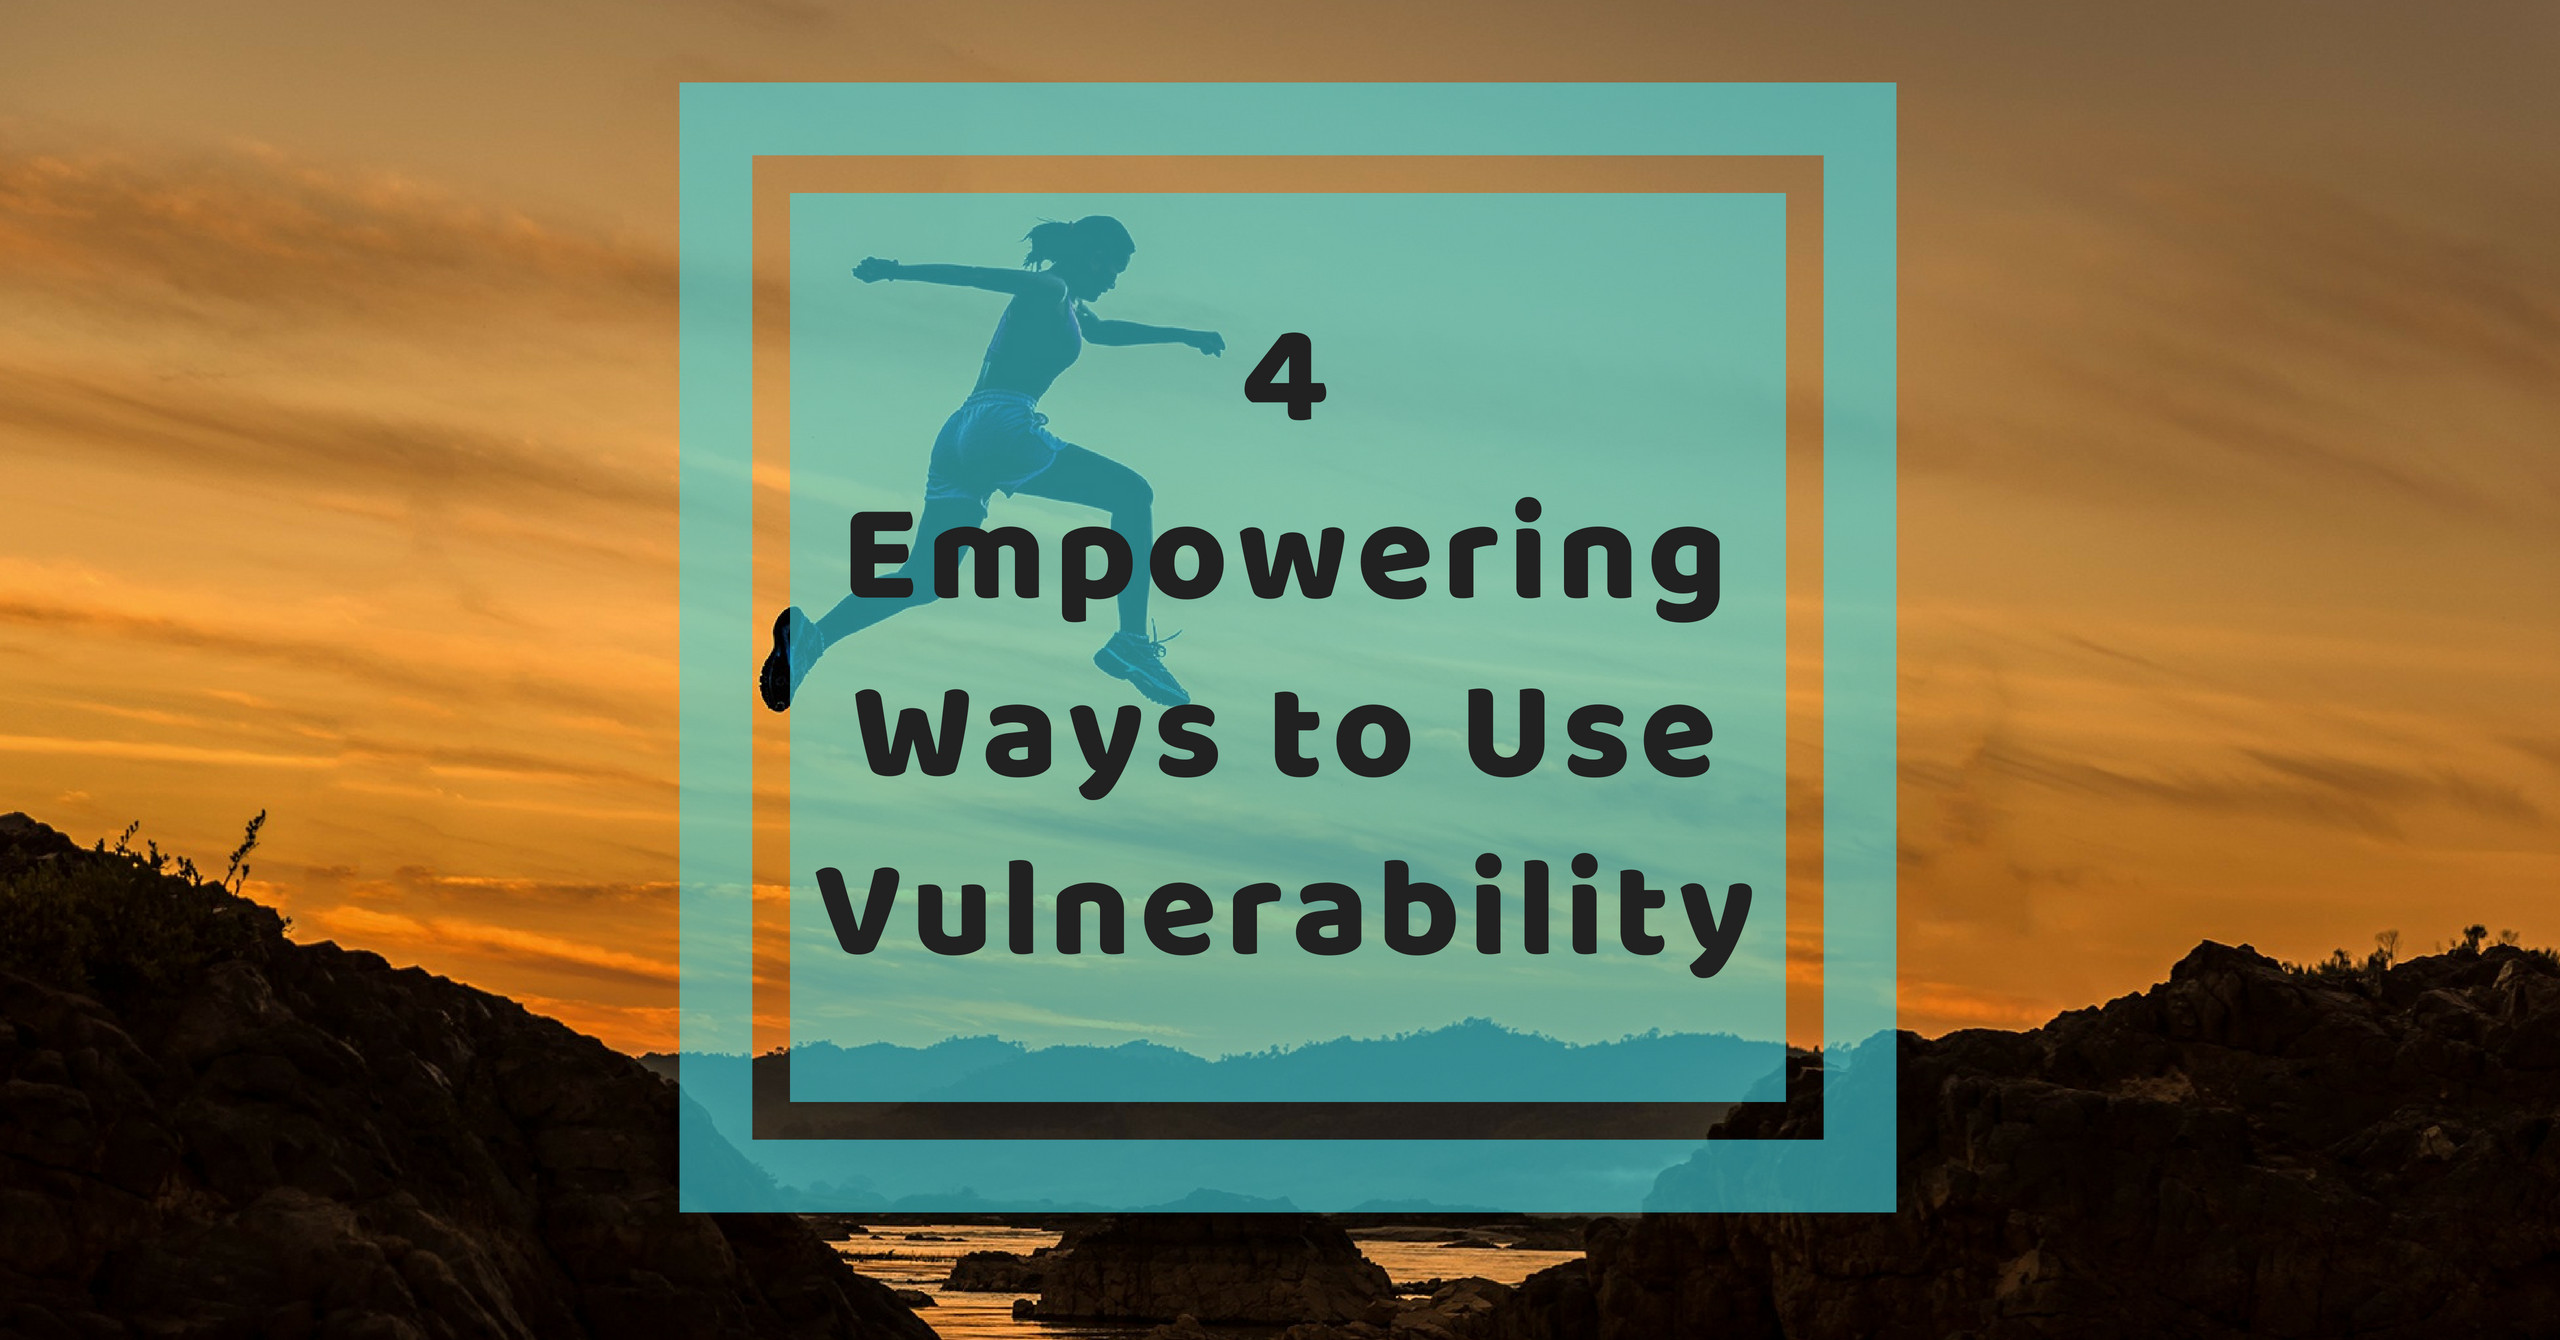 4 Empowering Ways to Use Vulnerability